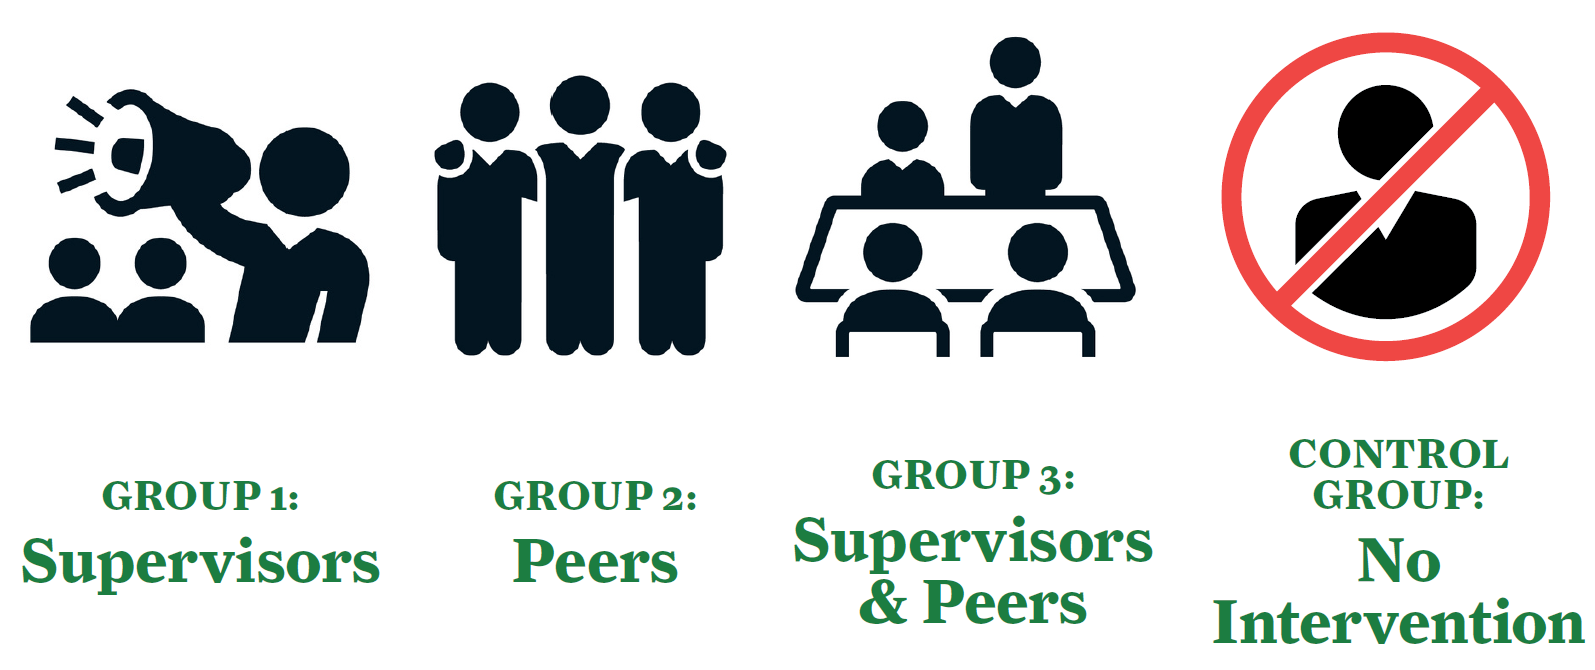 Illustration showing four groups, one led by supervisors, another by peers, one by both peers and supervisors, and one control group that had no intervention